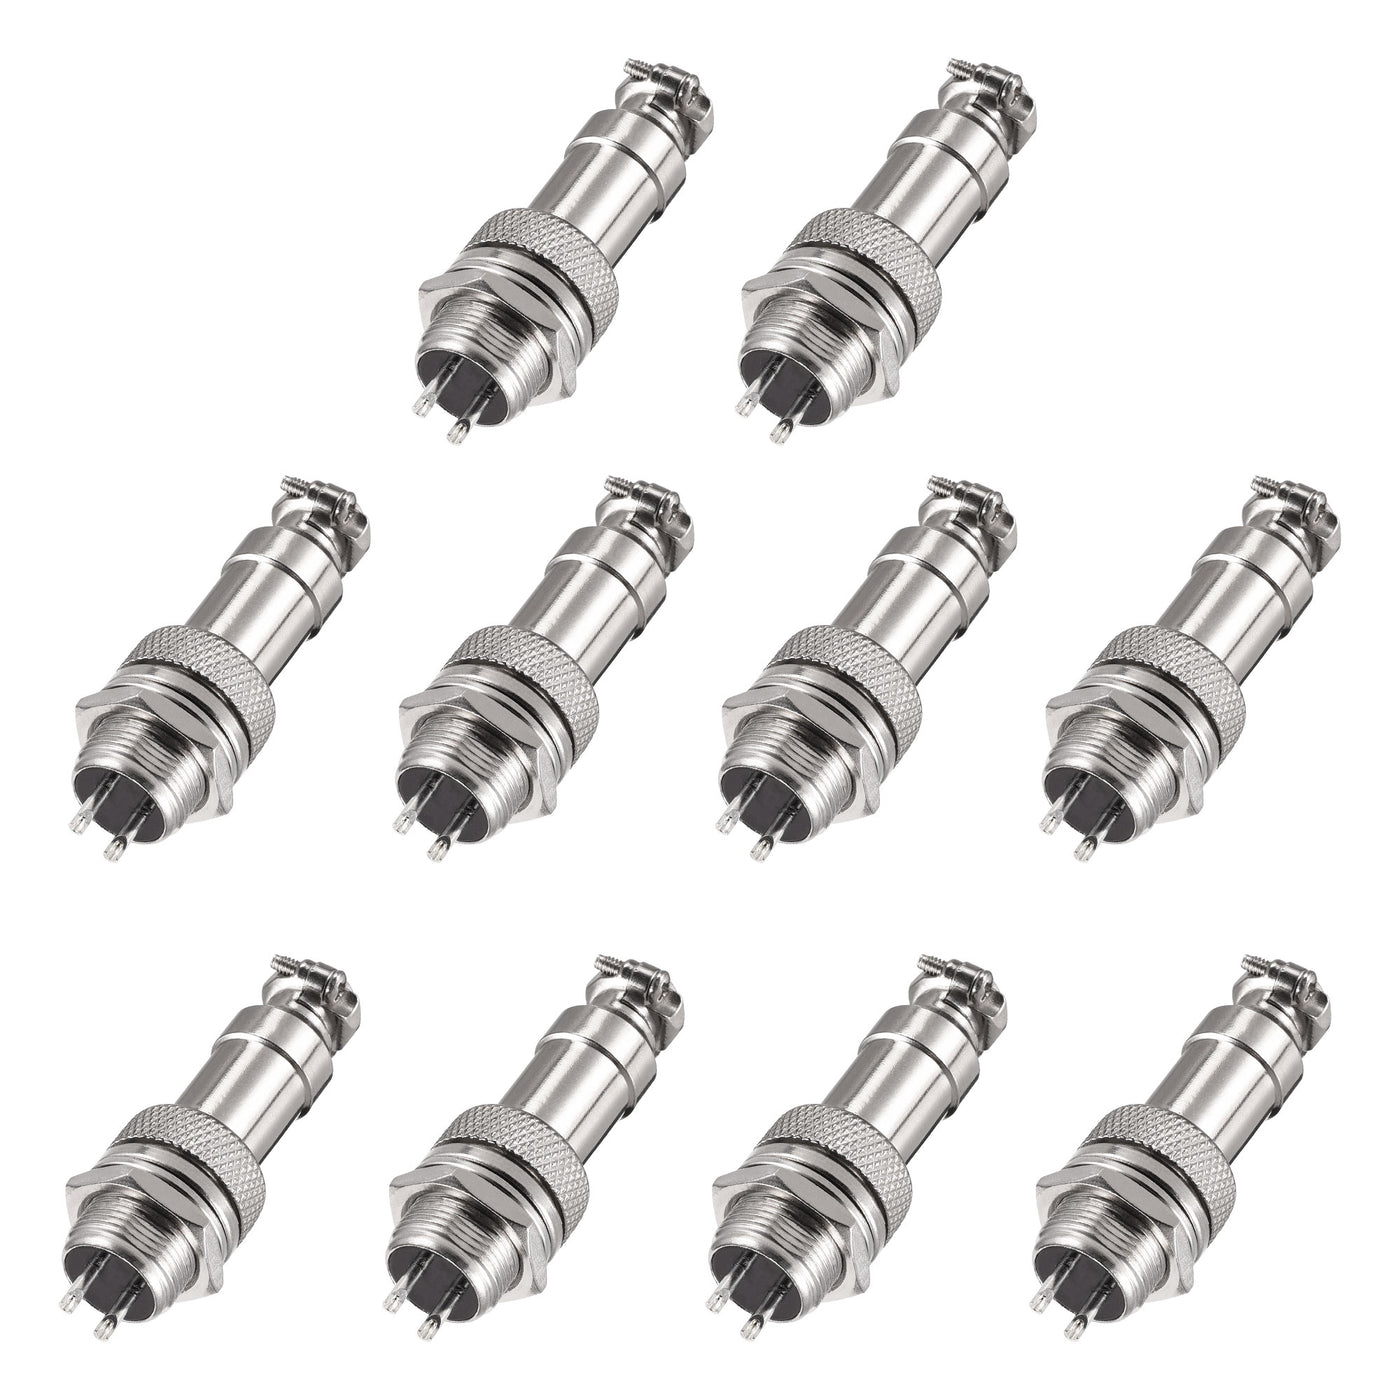 uxcell Uxcell Aviation Connector 12mm 2 Terminals 5A 300V GX12 Waterproof Male Female Panel Metal Wire Connector Fittings 10 pairs